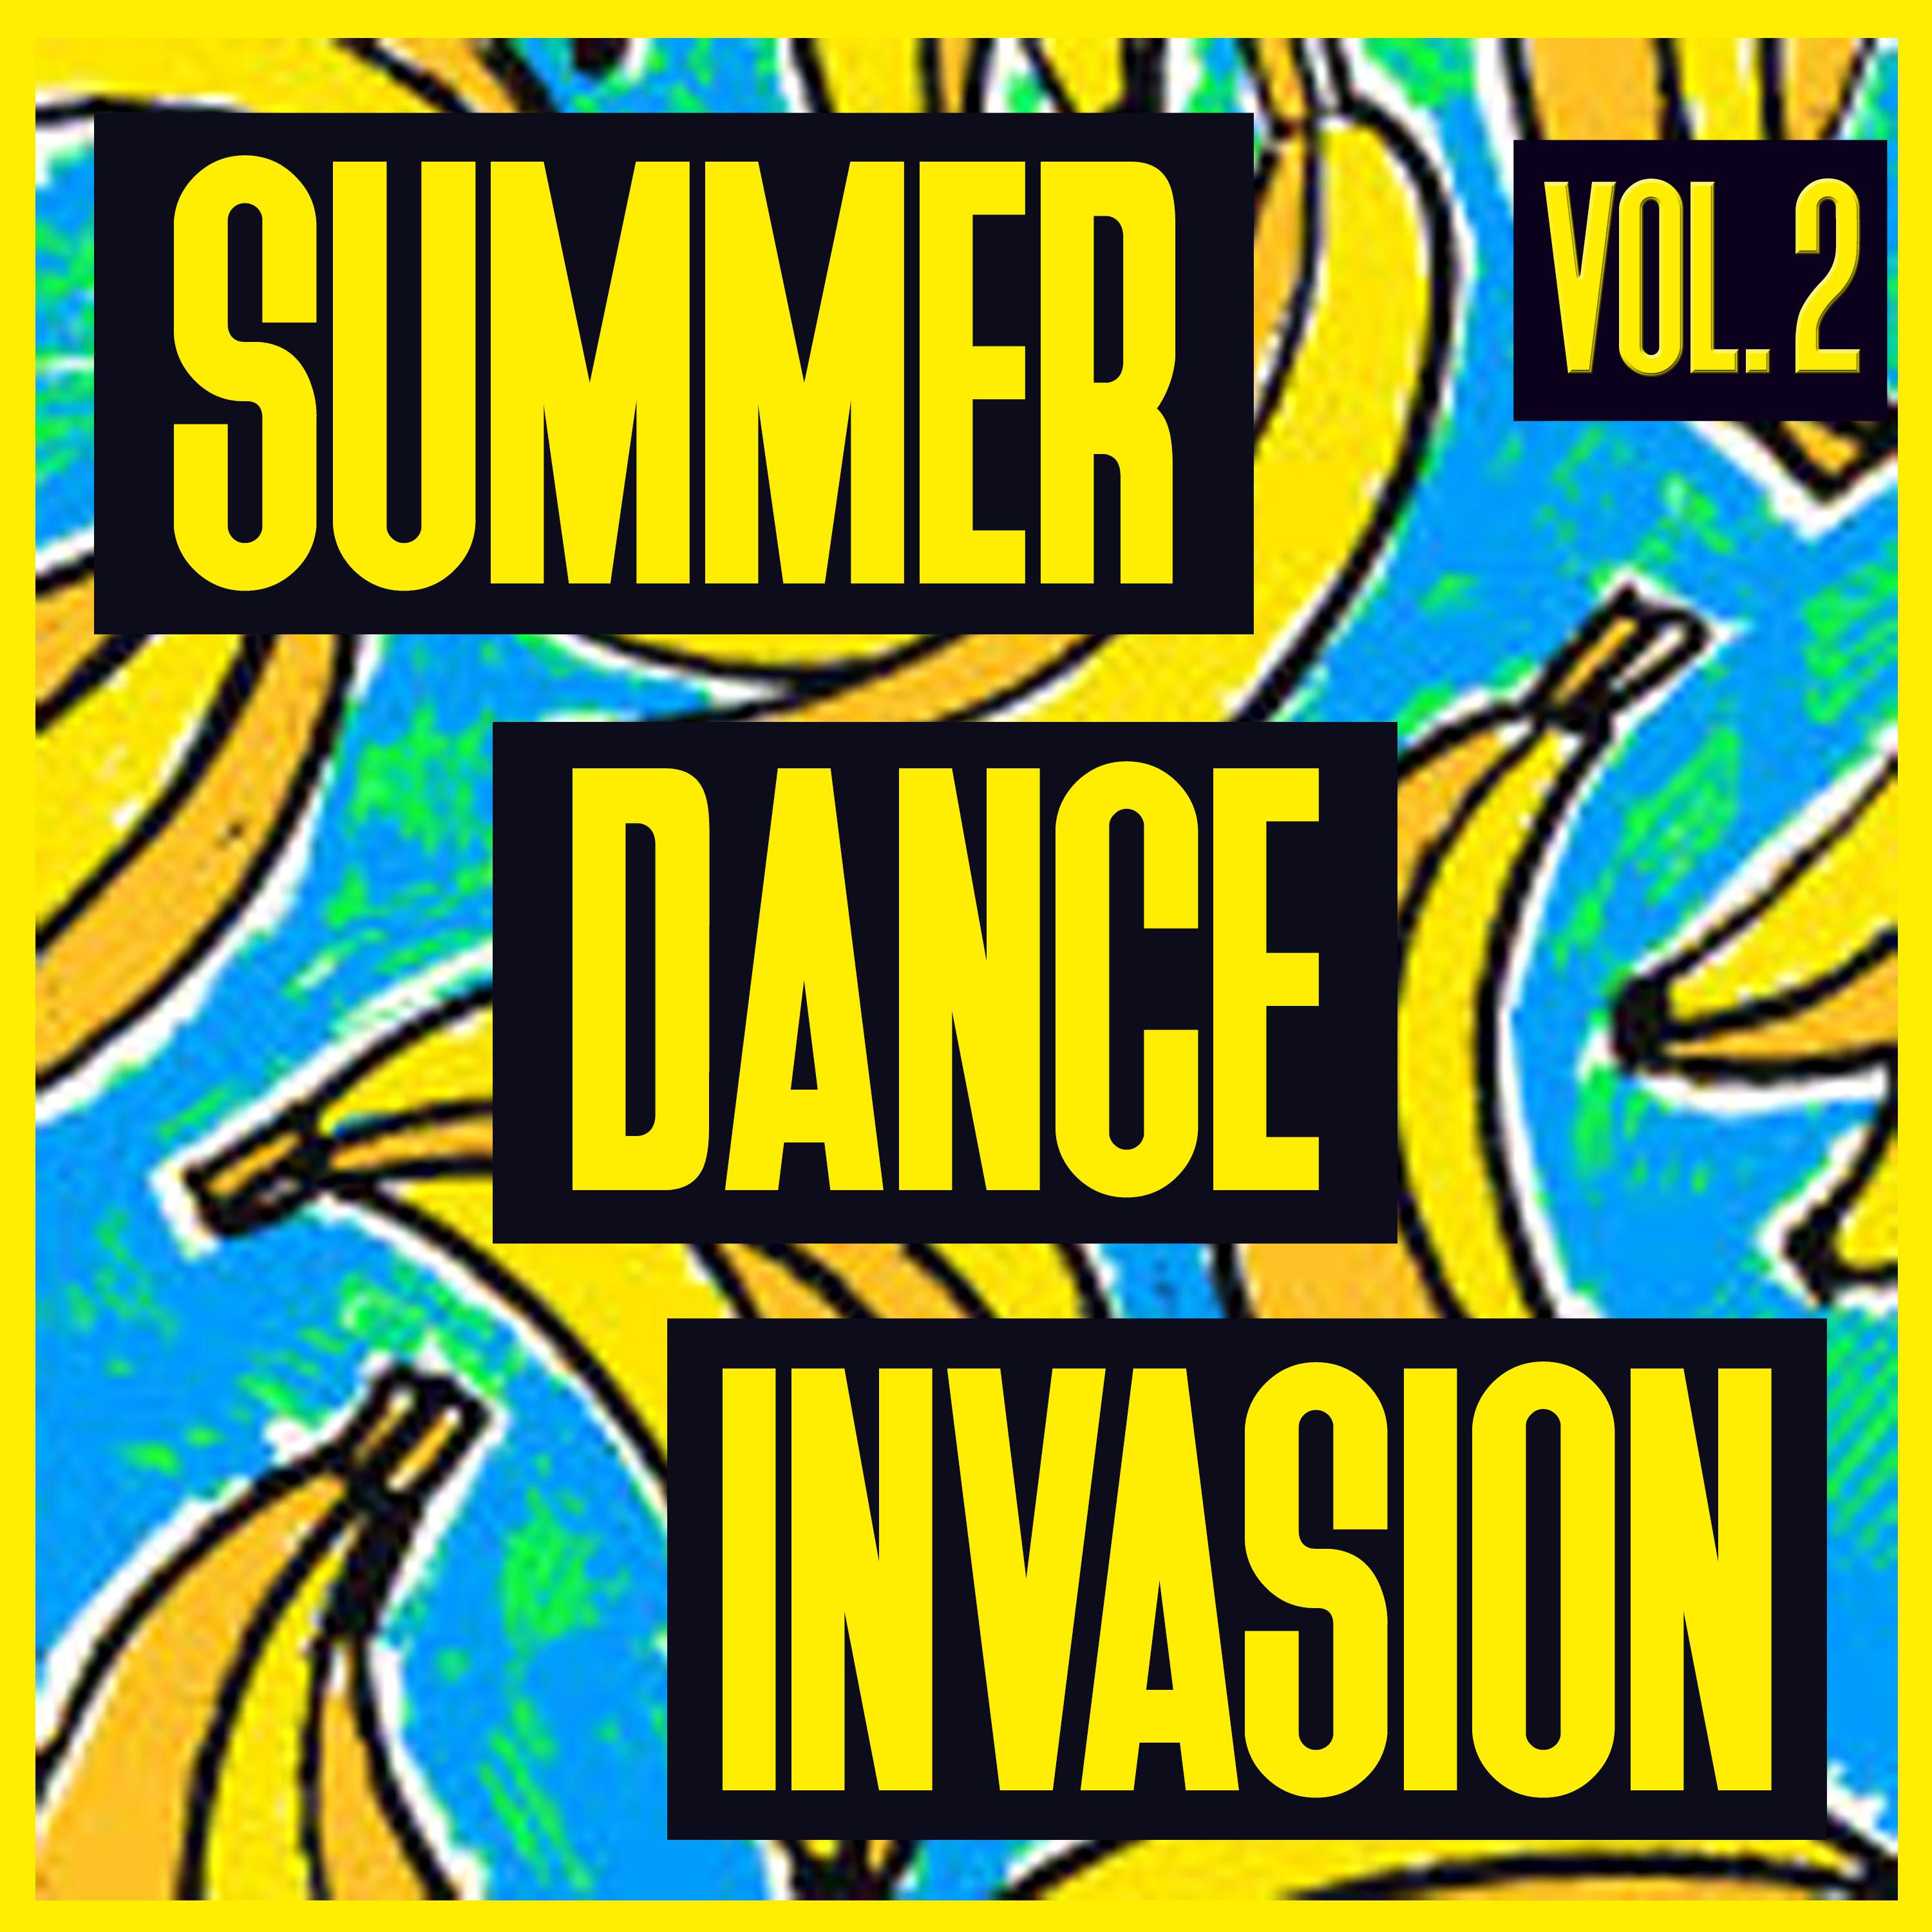 Summer Dance Invasion, Vol. 2 - Selection of Dance Music